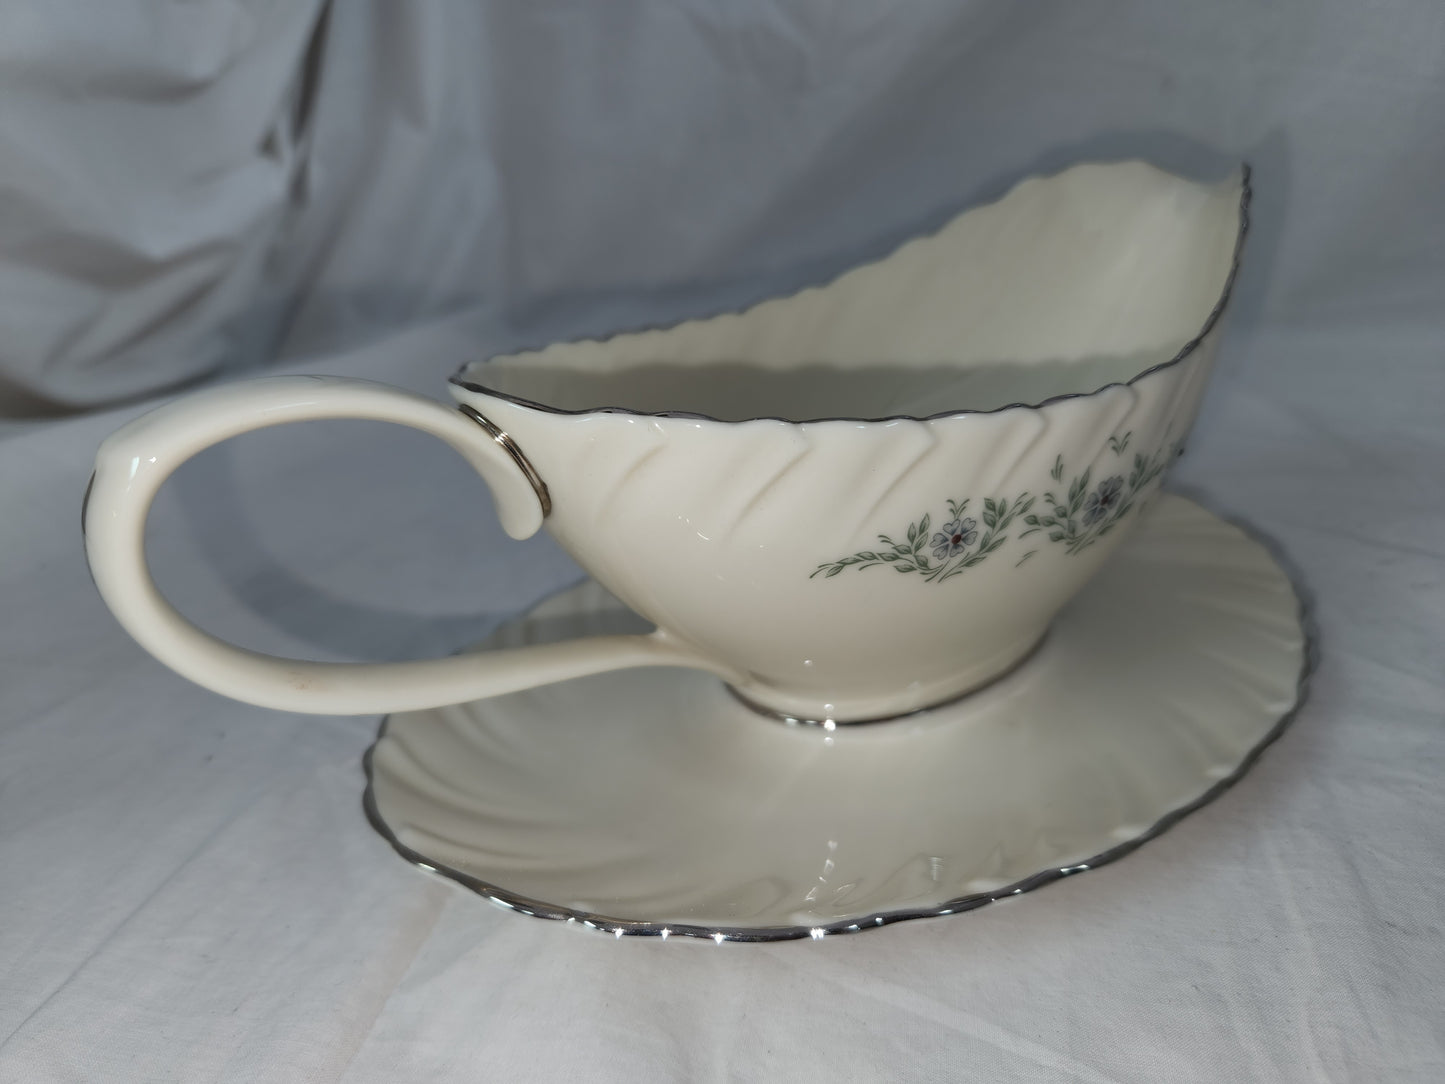 VTG - Musette by Lenox Gravy Boat w/Attached Underplate